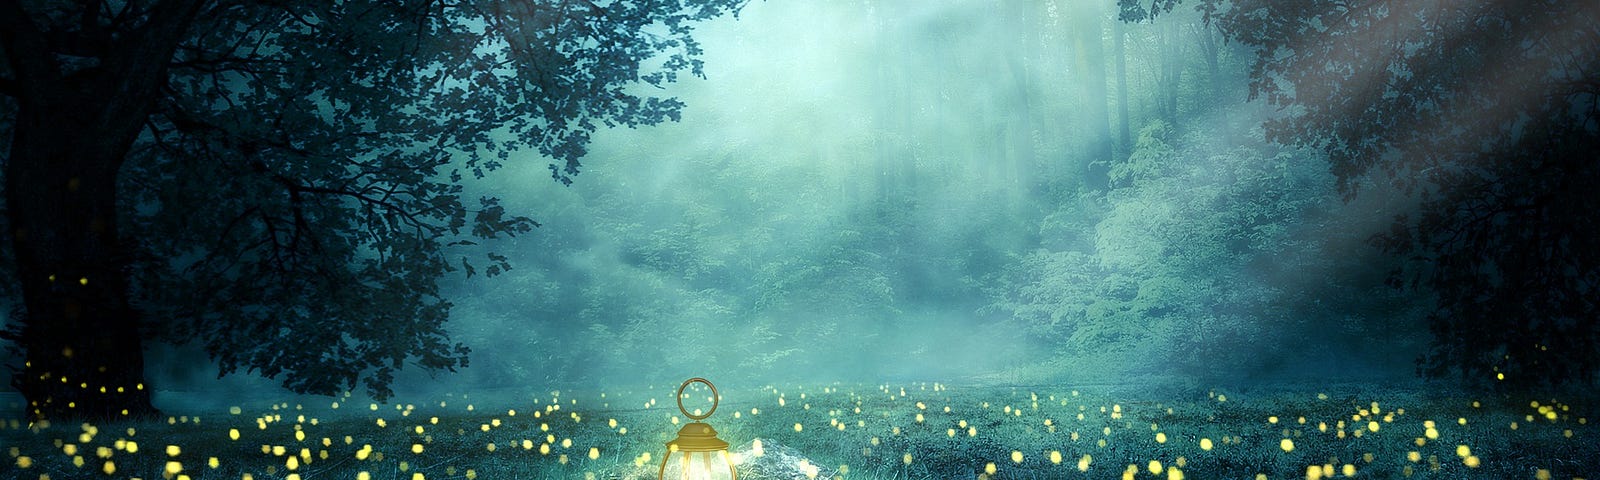 Fairy lights and a lantern in a beautiful green field